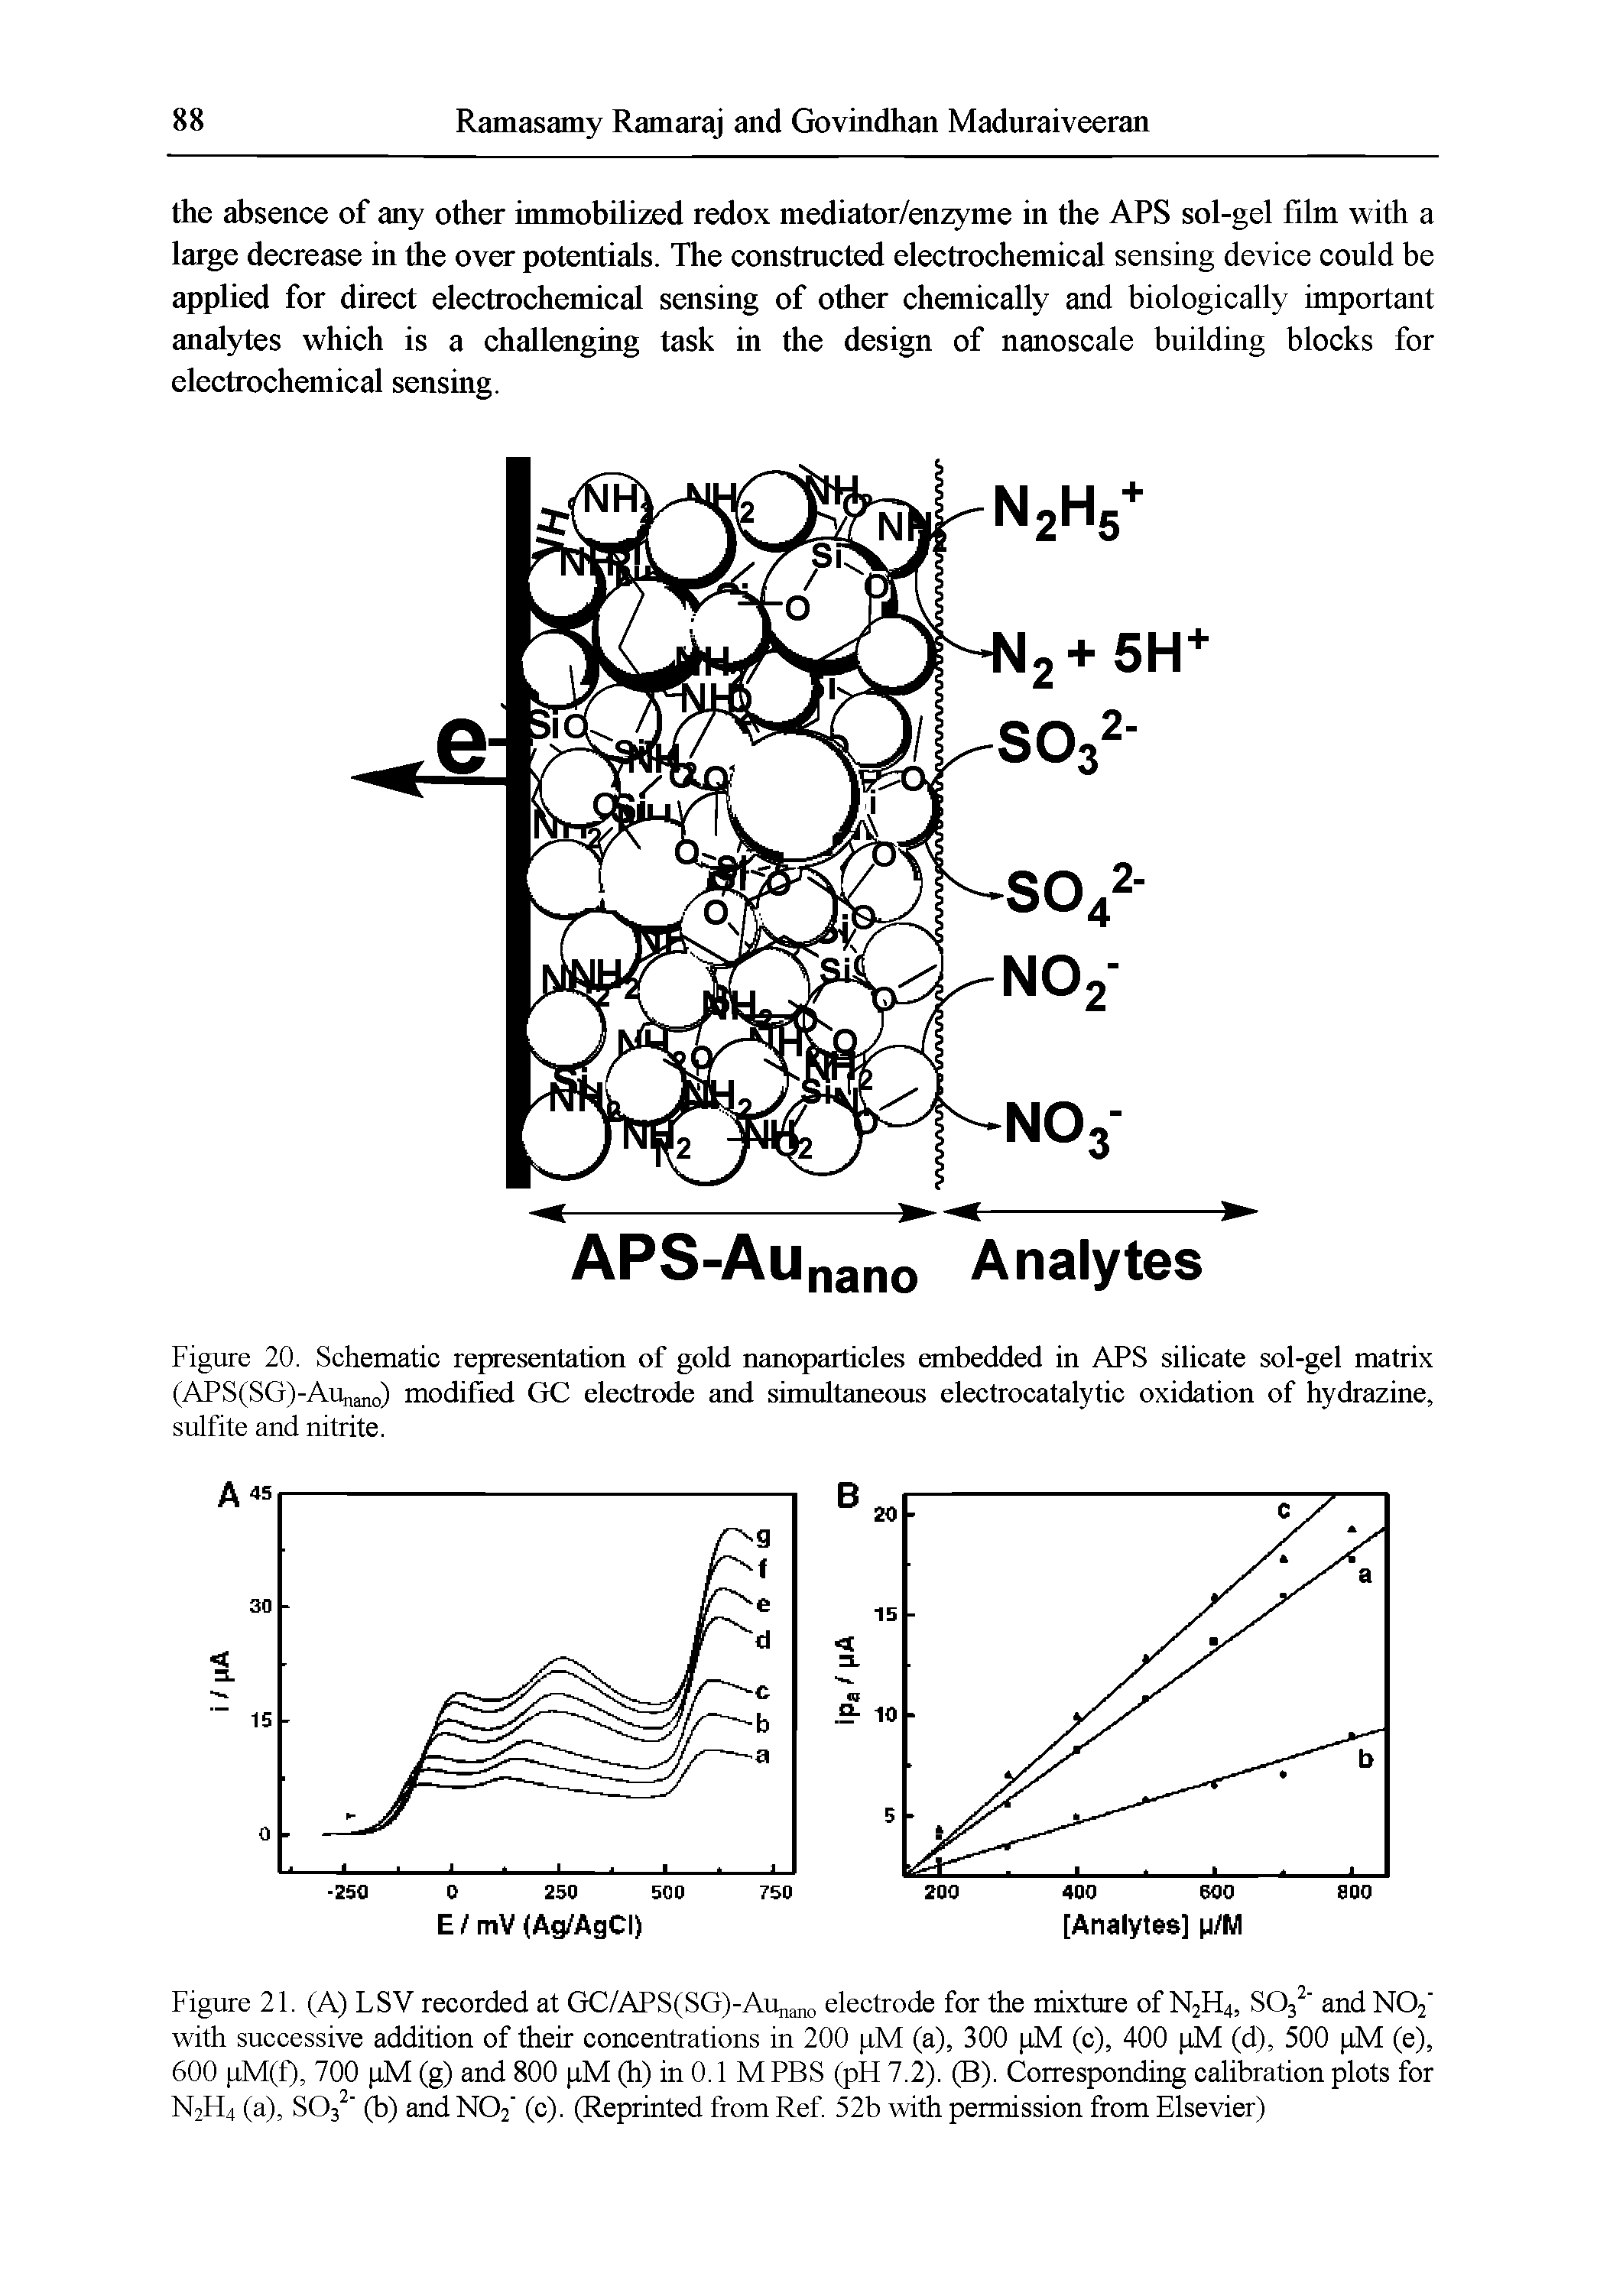 Figure 20. Schematic representation of gold nanoparticles embedded in APS silicate sol-gel matrix (APS(SG)-Aunano) modified GC electrode and simultaneous electrocatalytic oxidation of hydrazine, sulfite and nitrite.